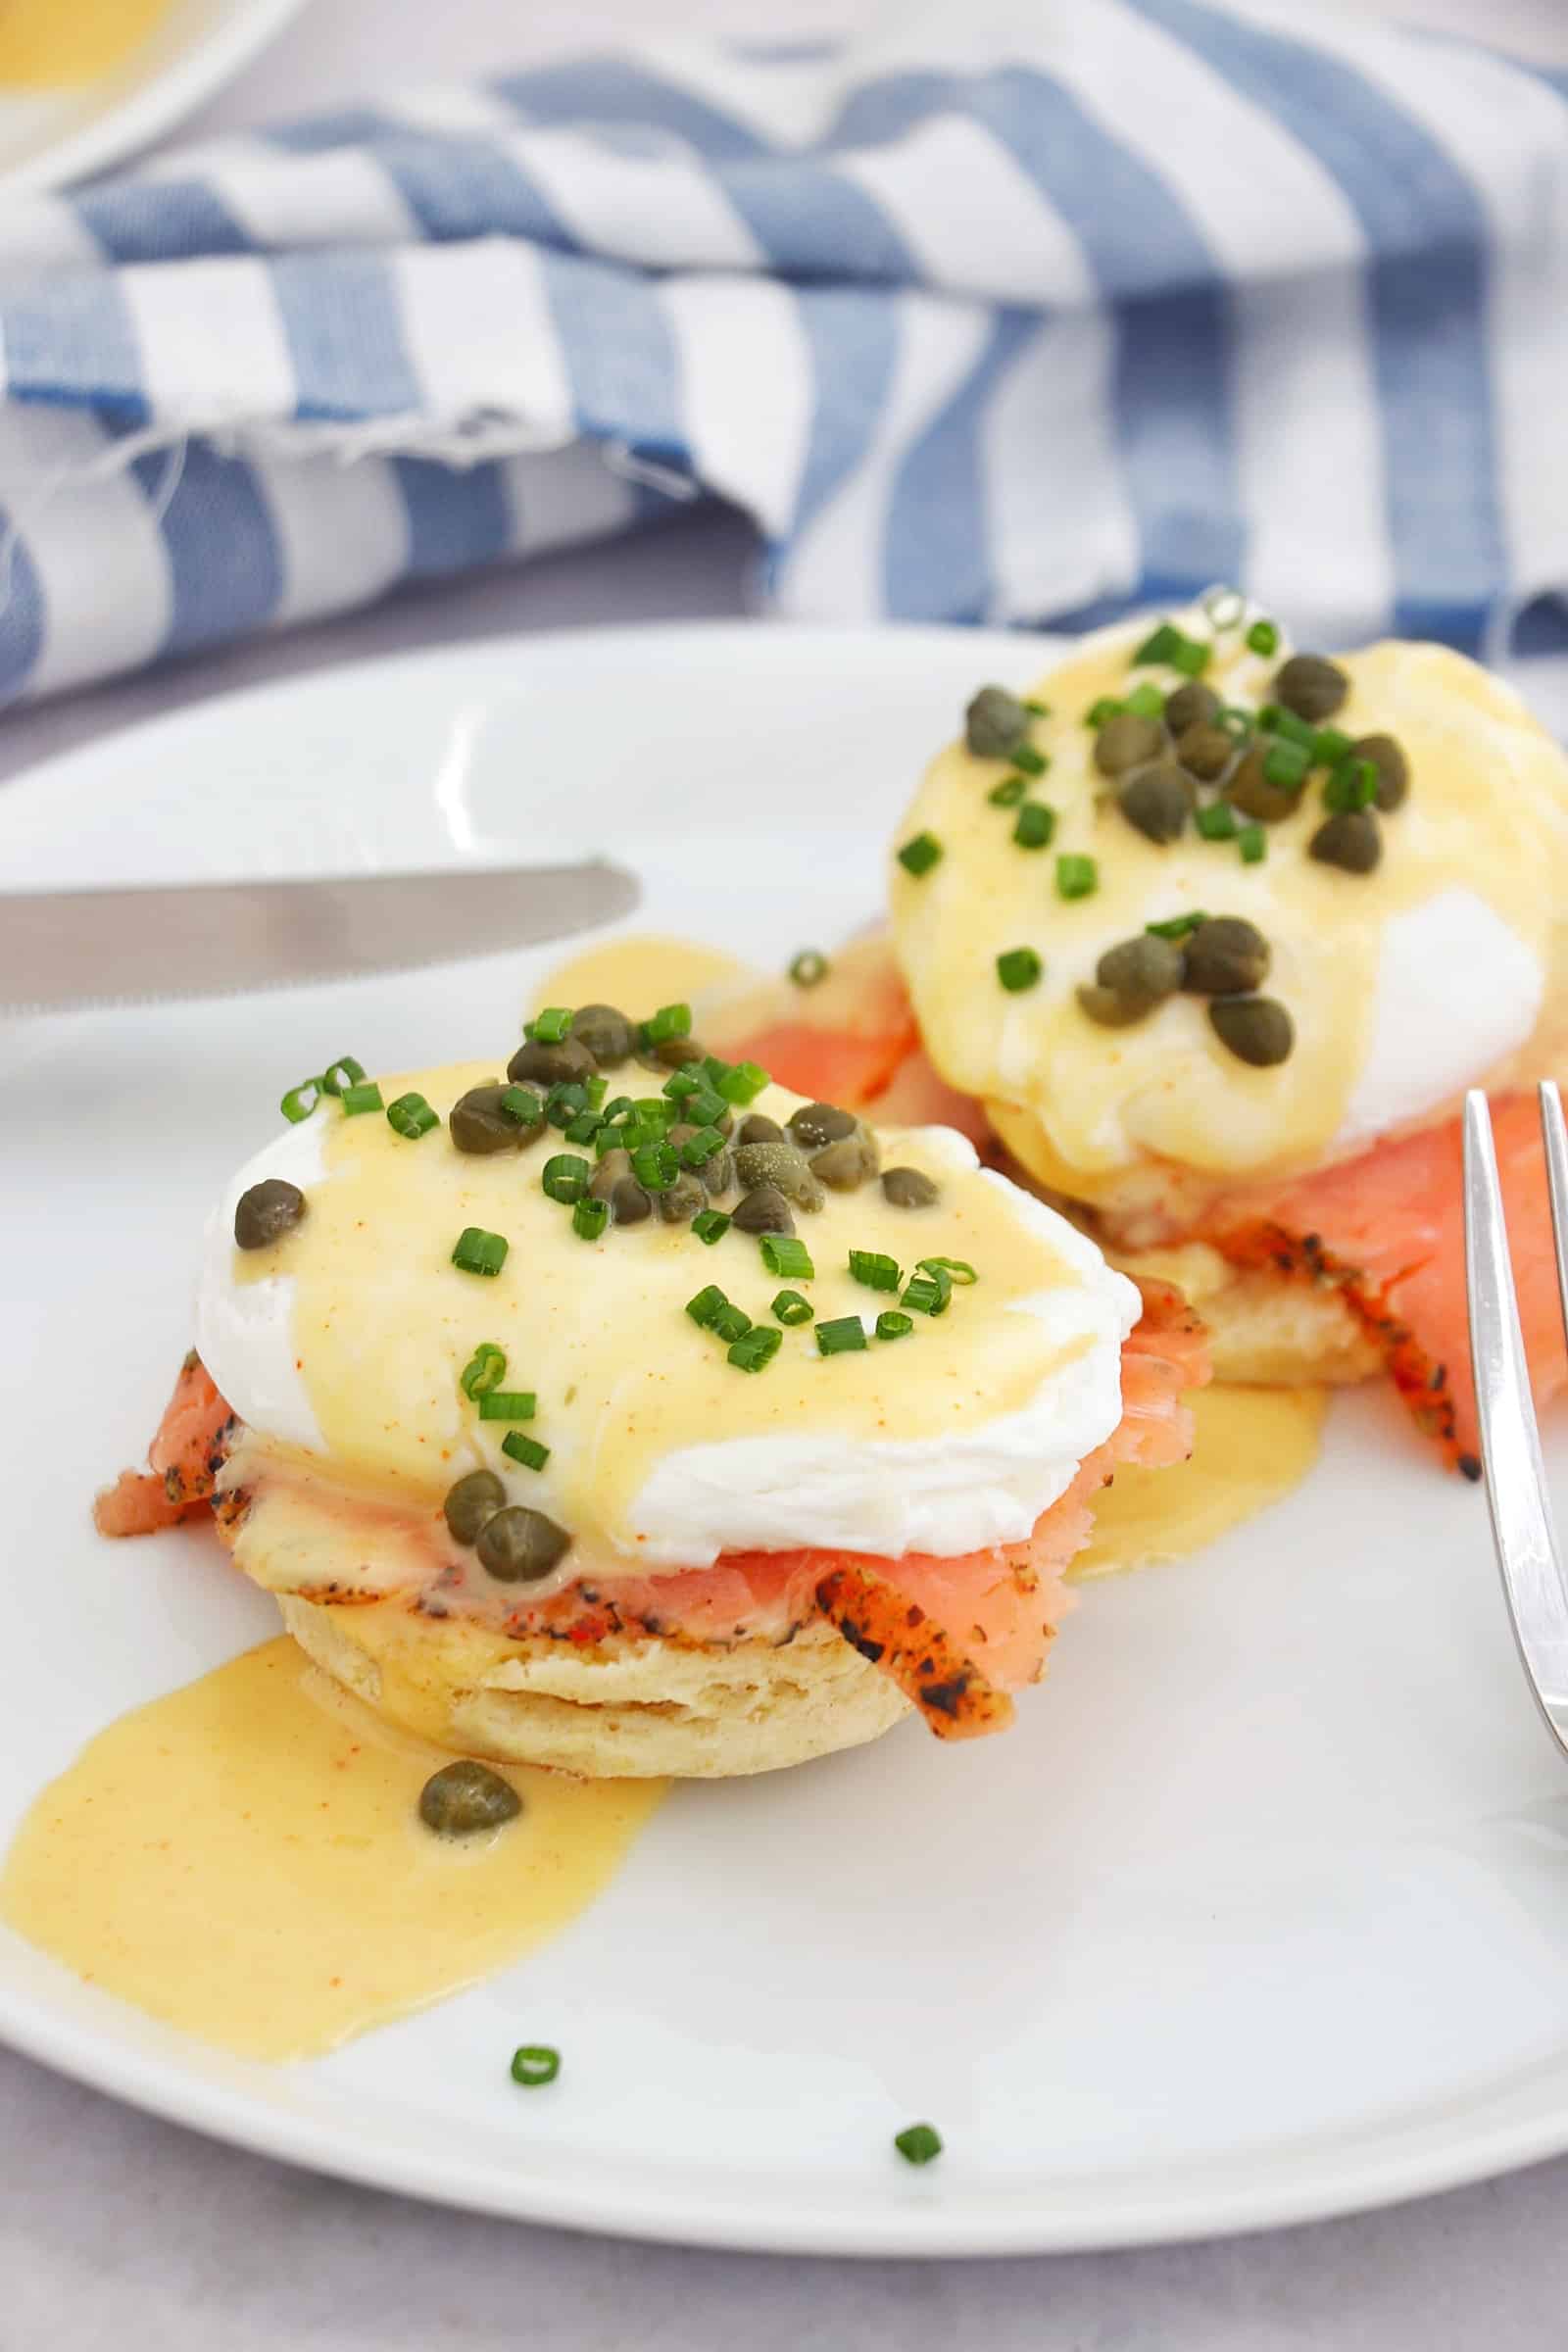 lox benedict on a plate.